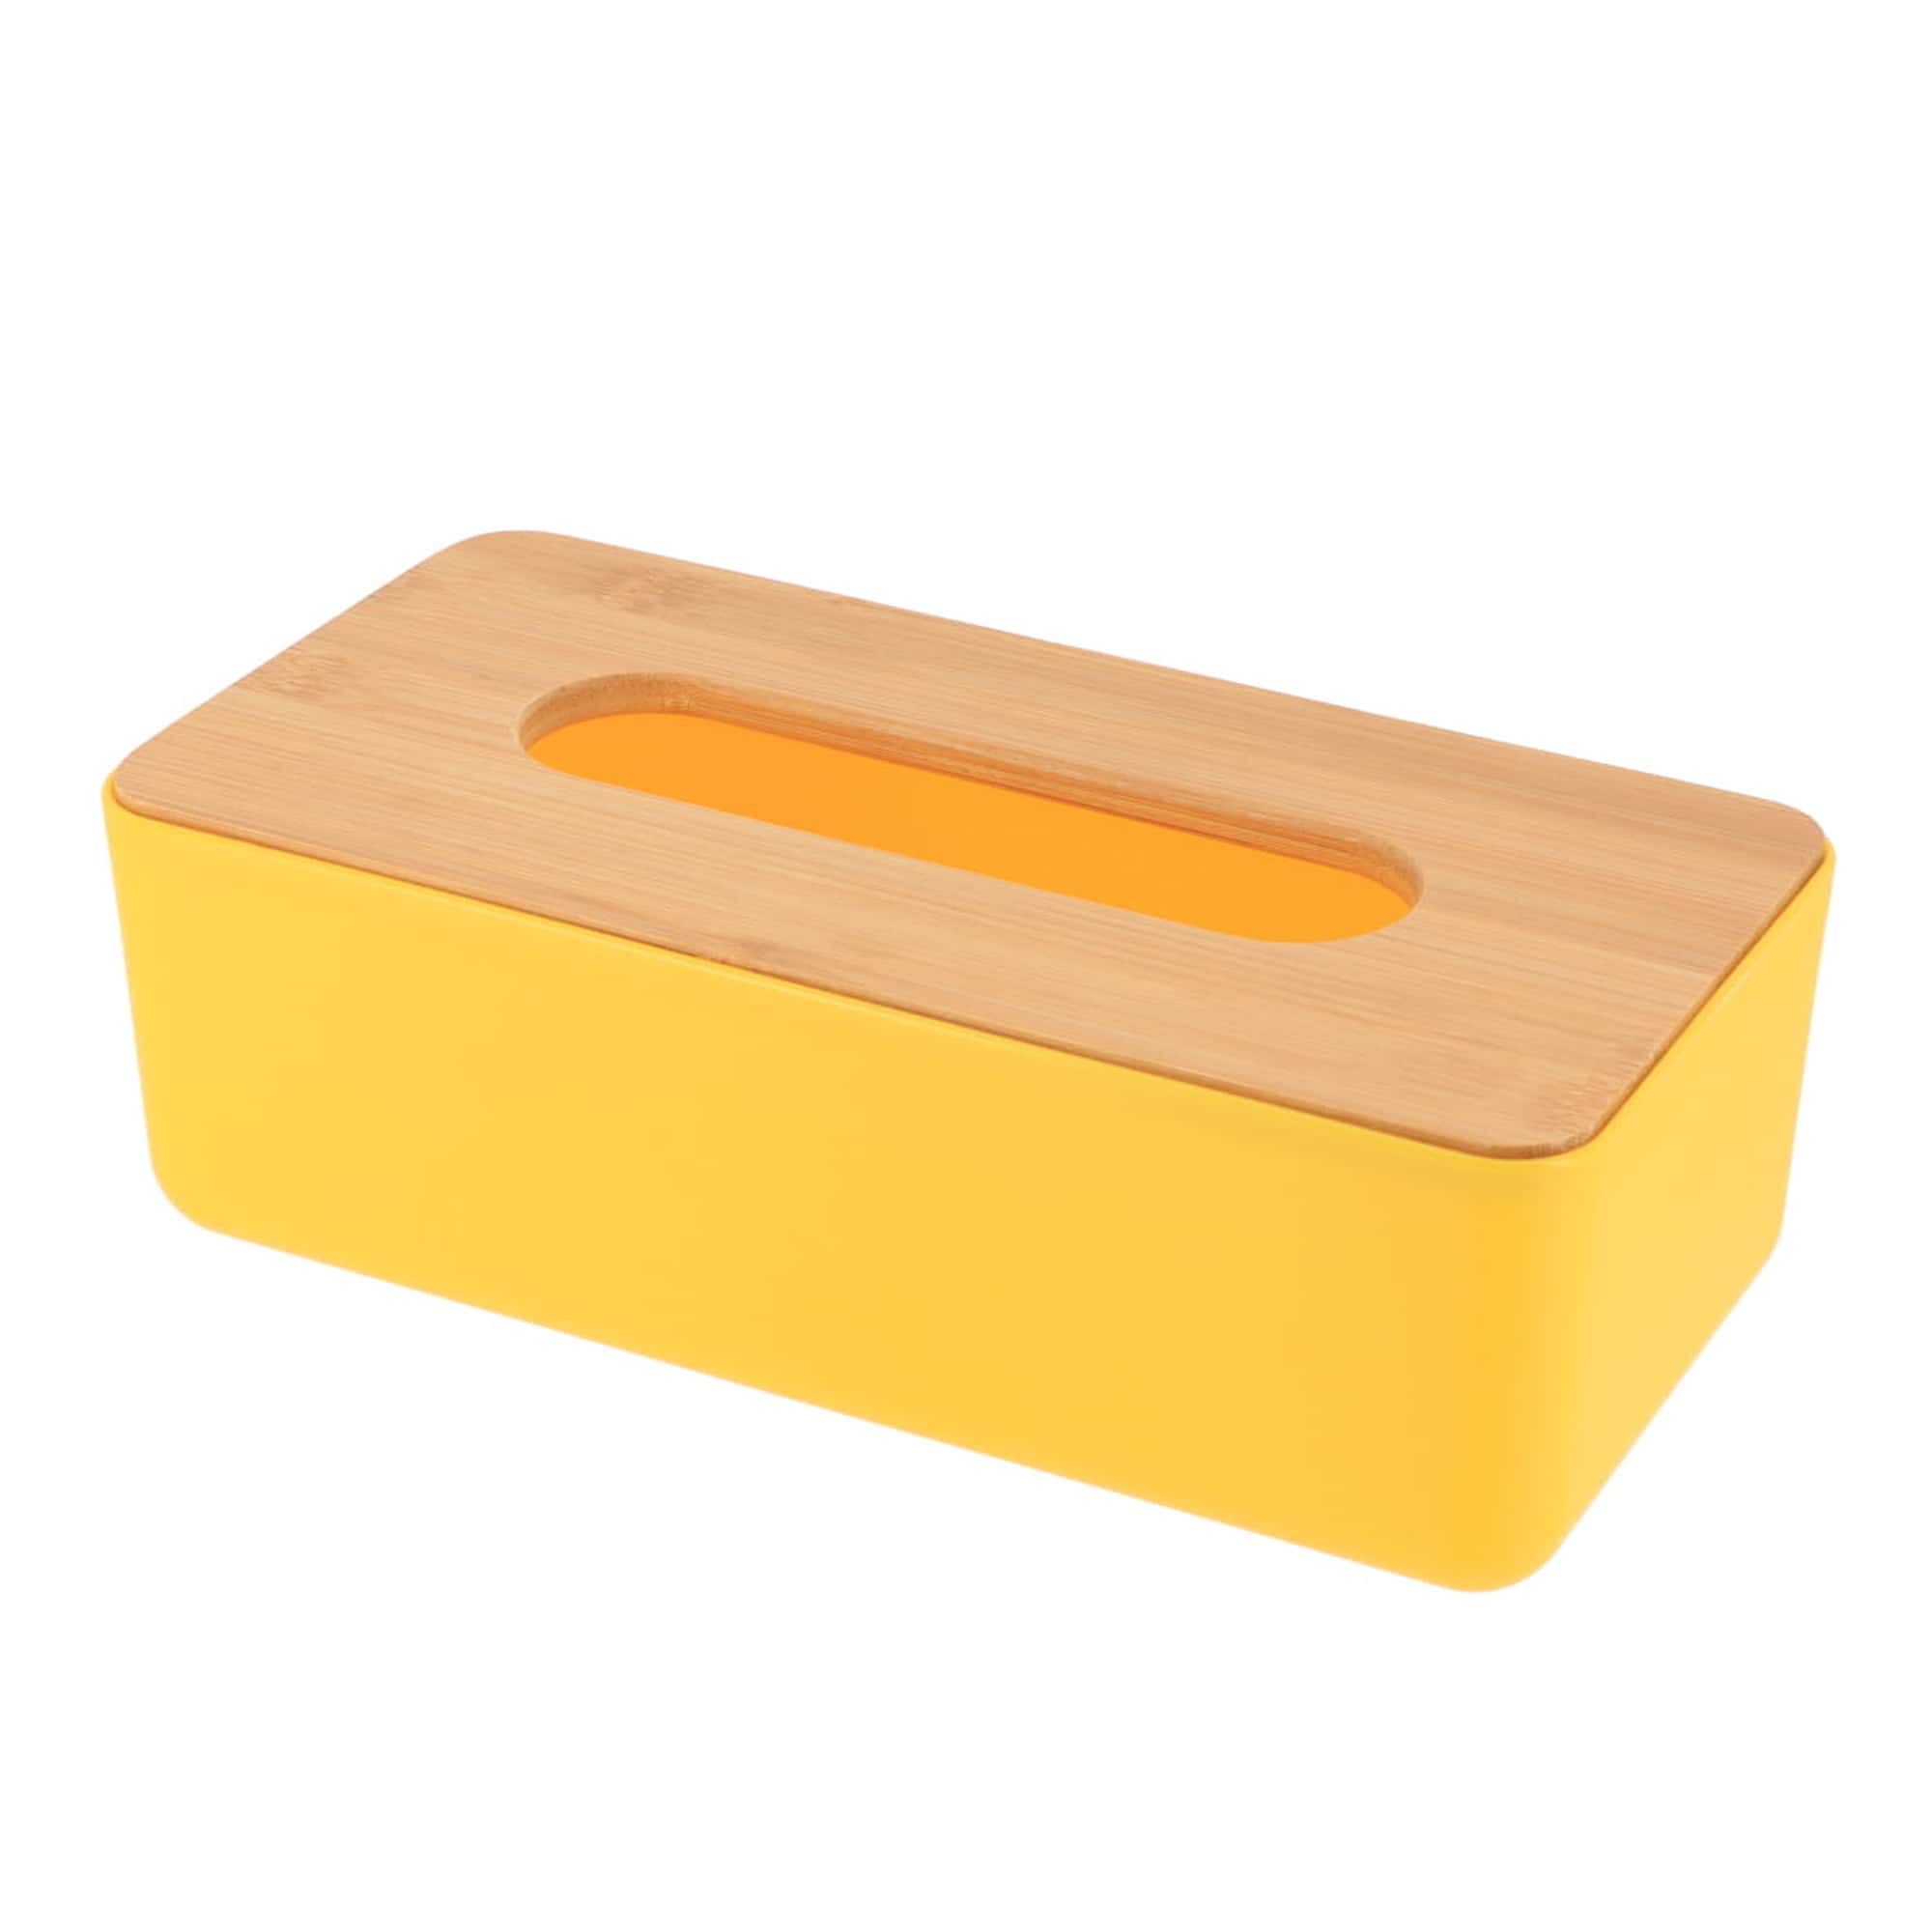 yellow and bamboo tissue box cover